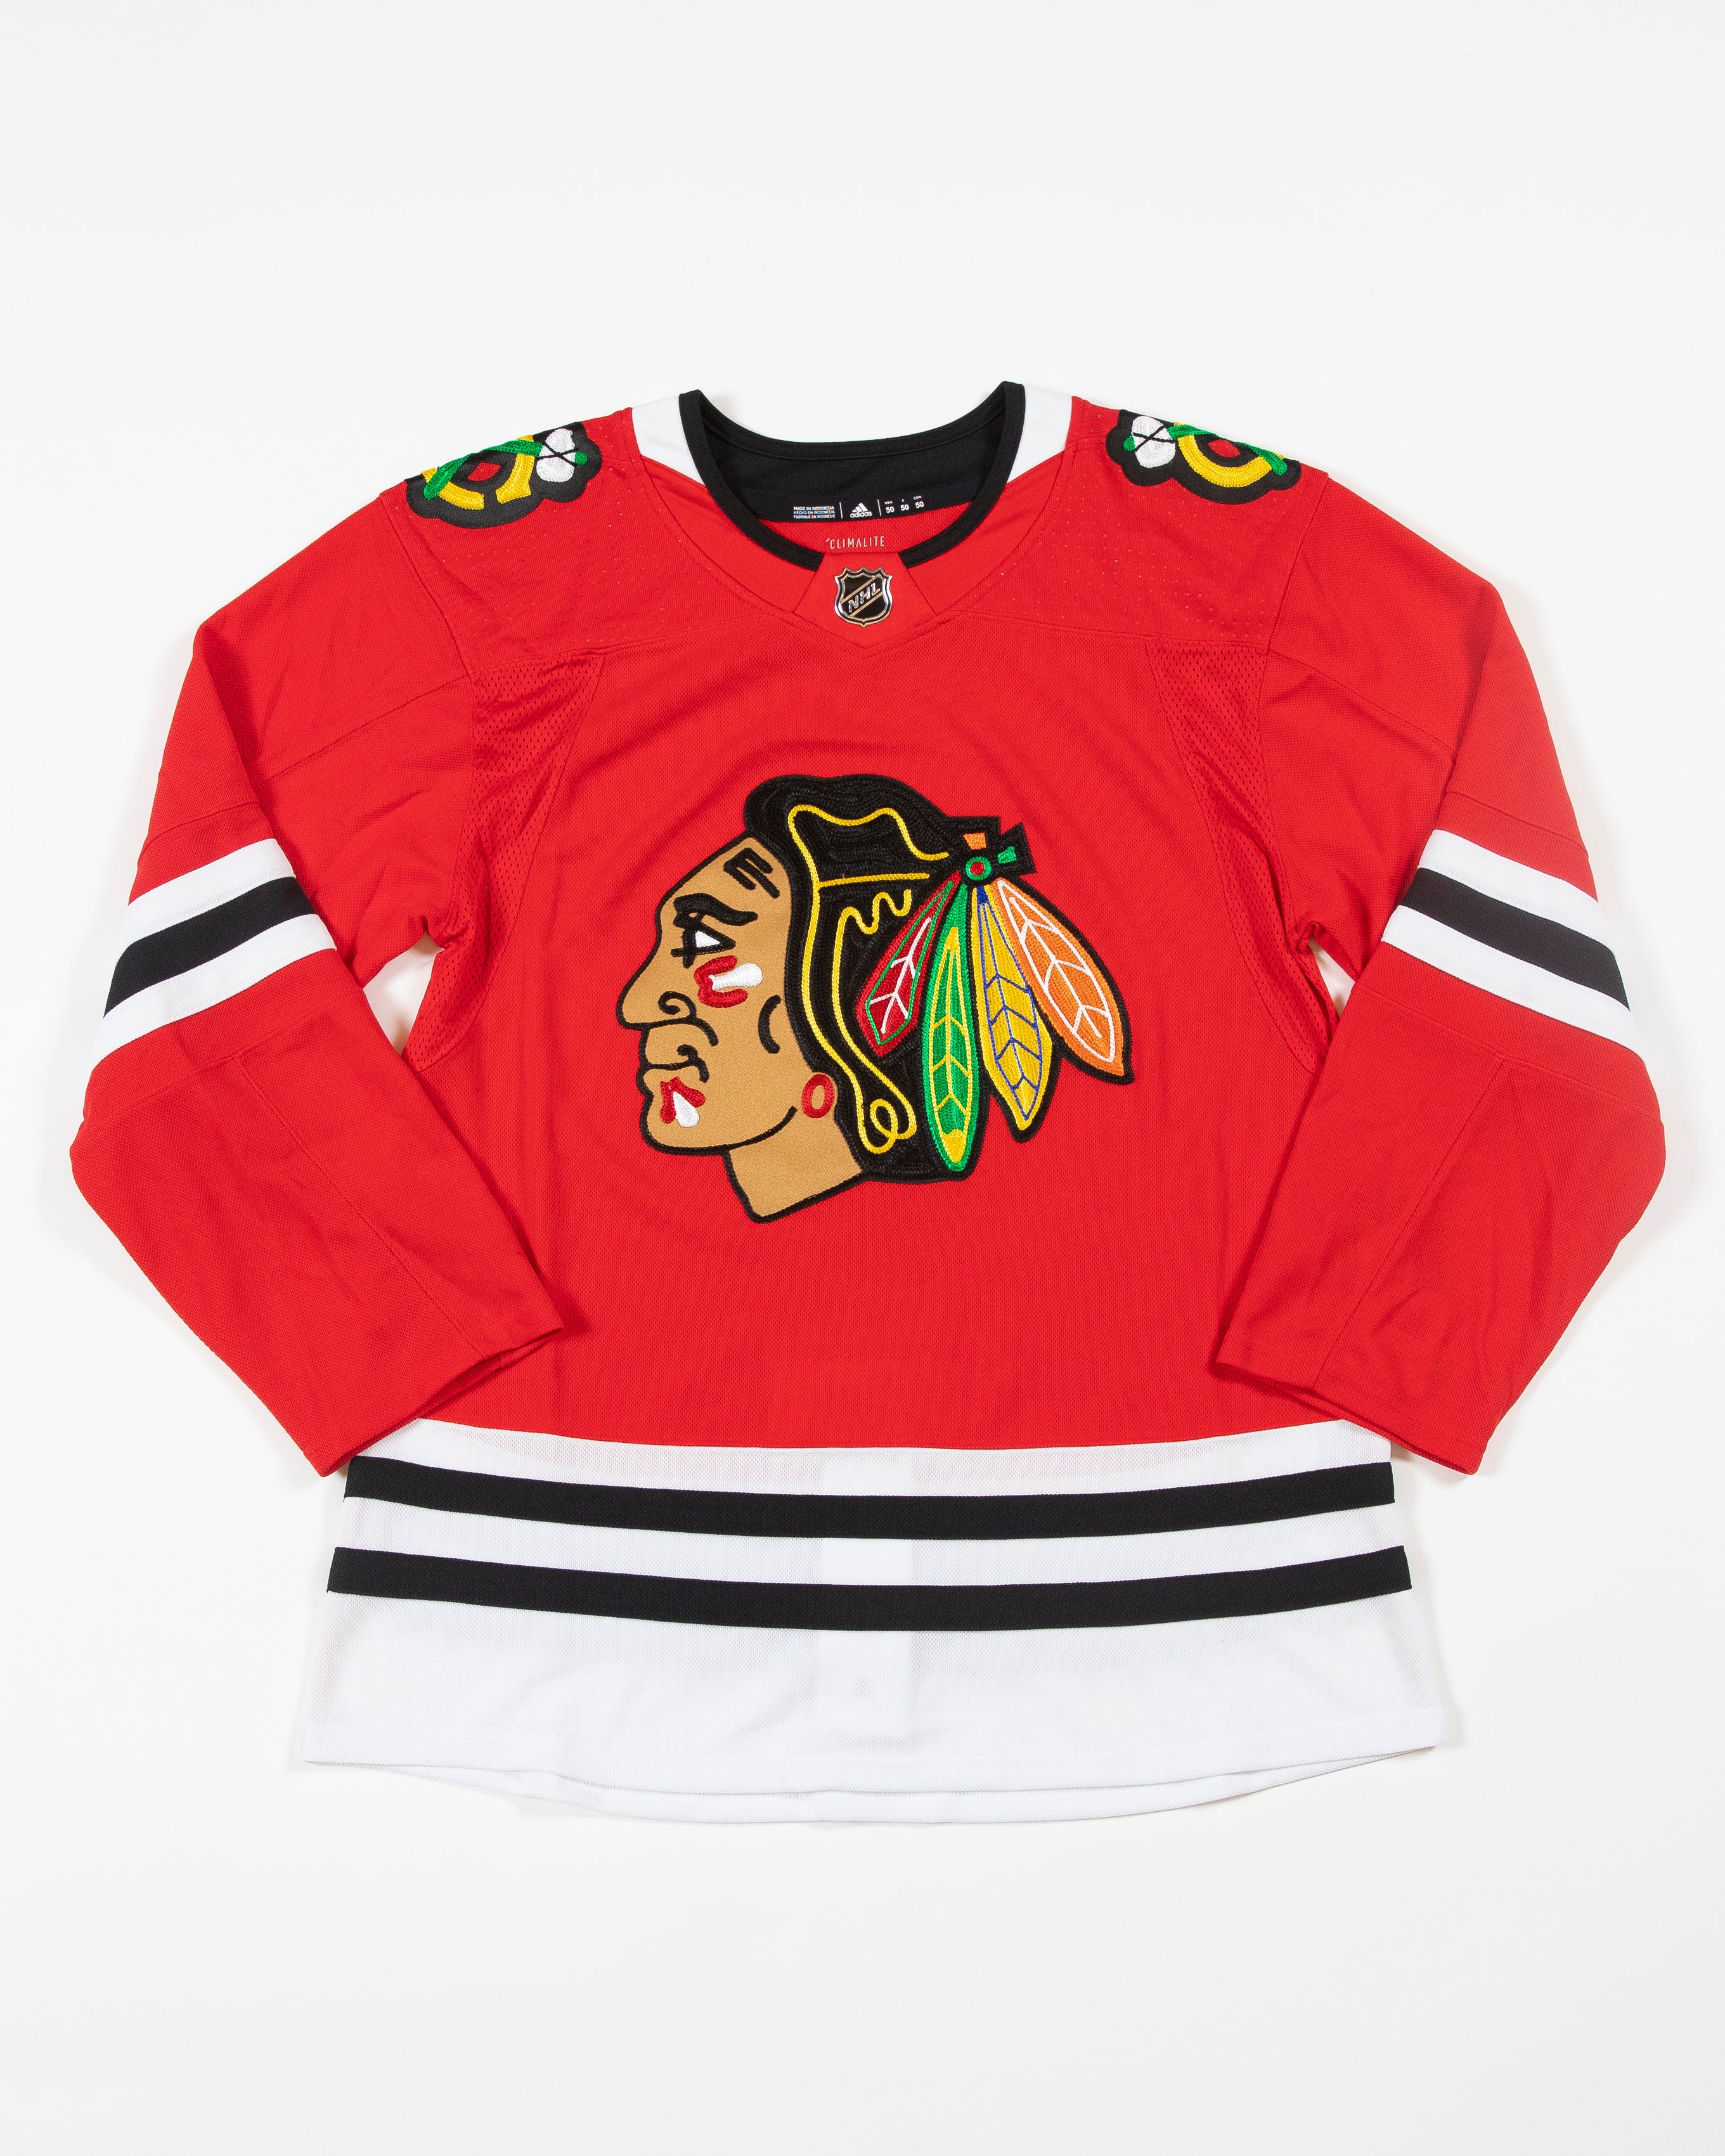 Youth Red Chicago Blackhawks Play-By-Play Performance Pullover